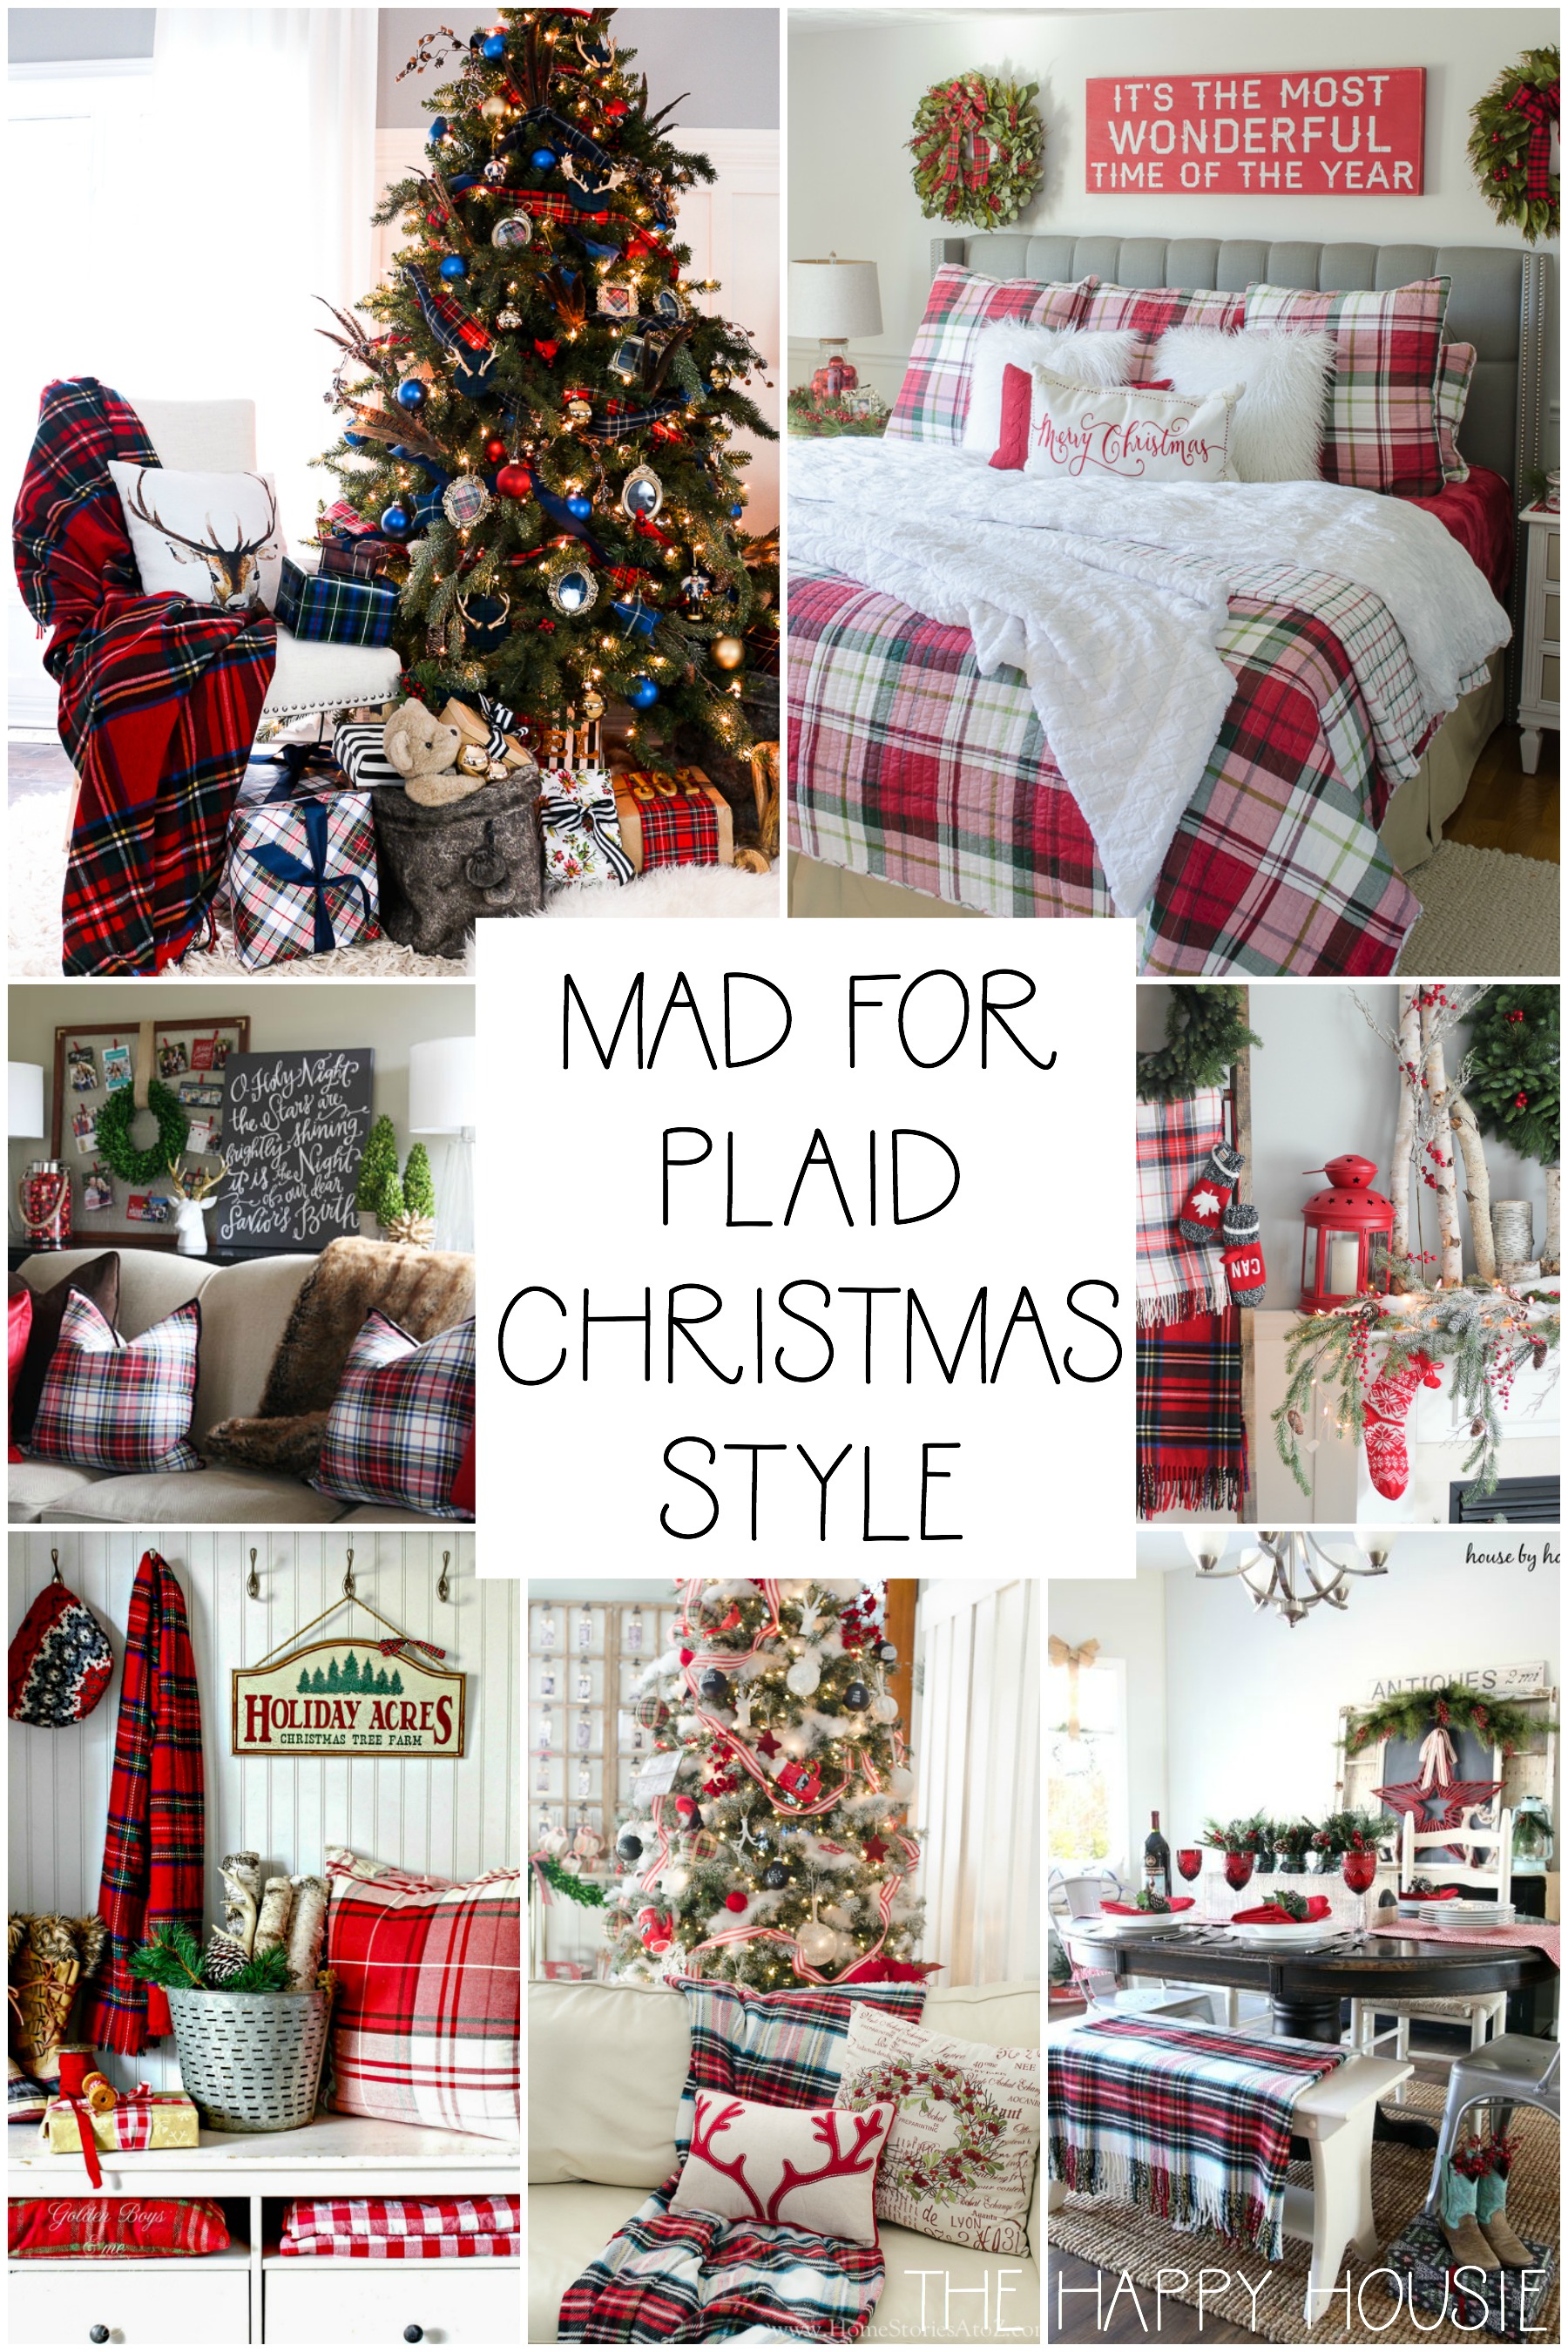 Mad For Plaid Christmas Style poster.